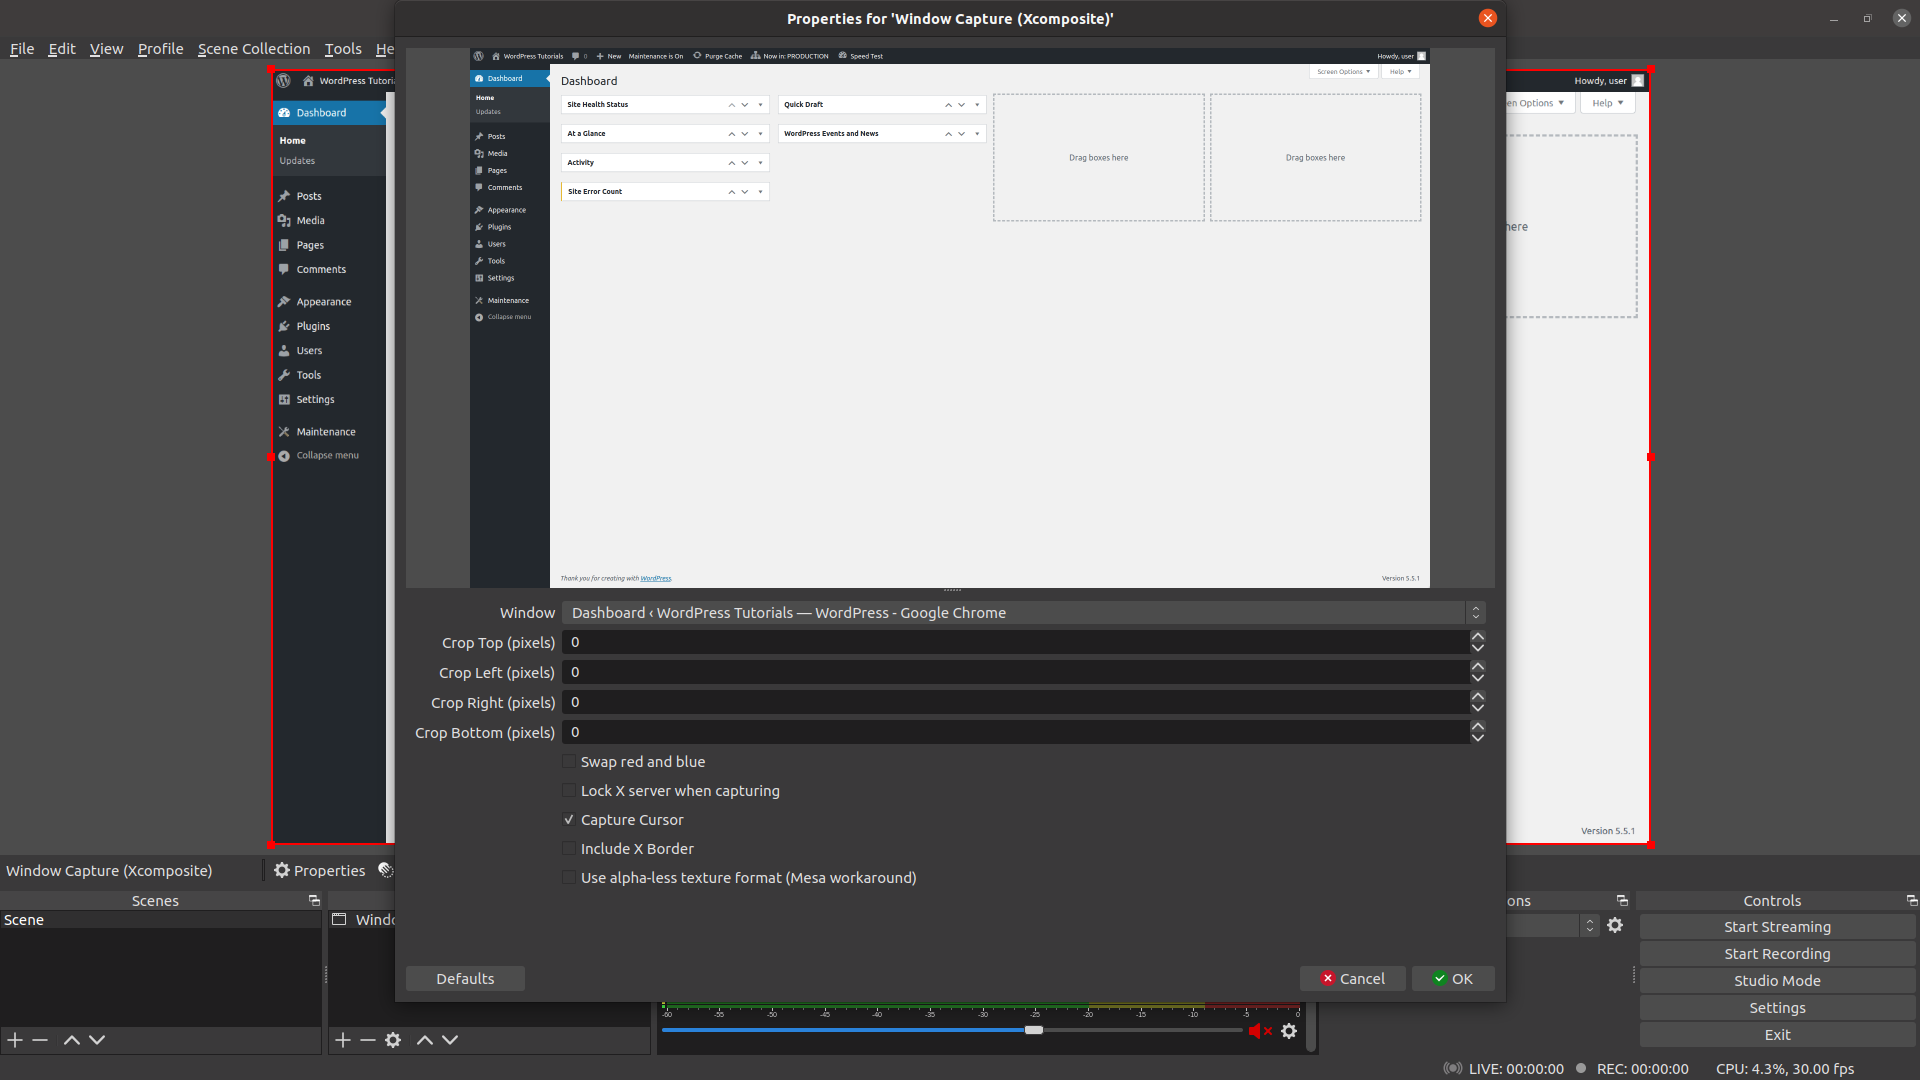 OBS Software: A Versatile Tool For Recording Video And Live